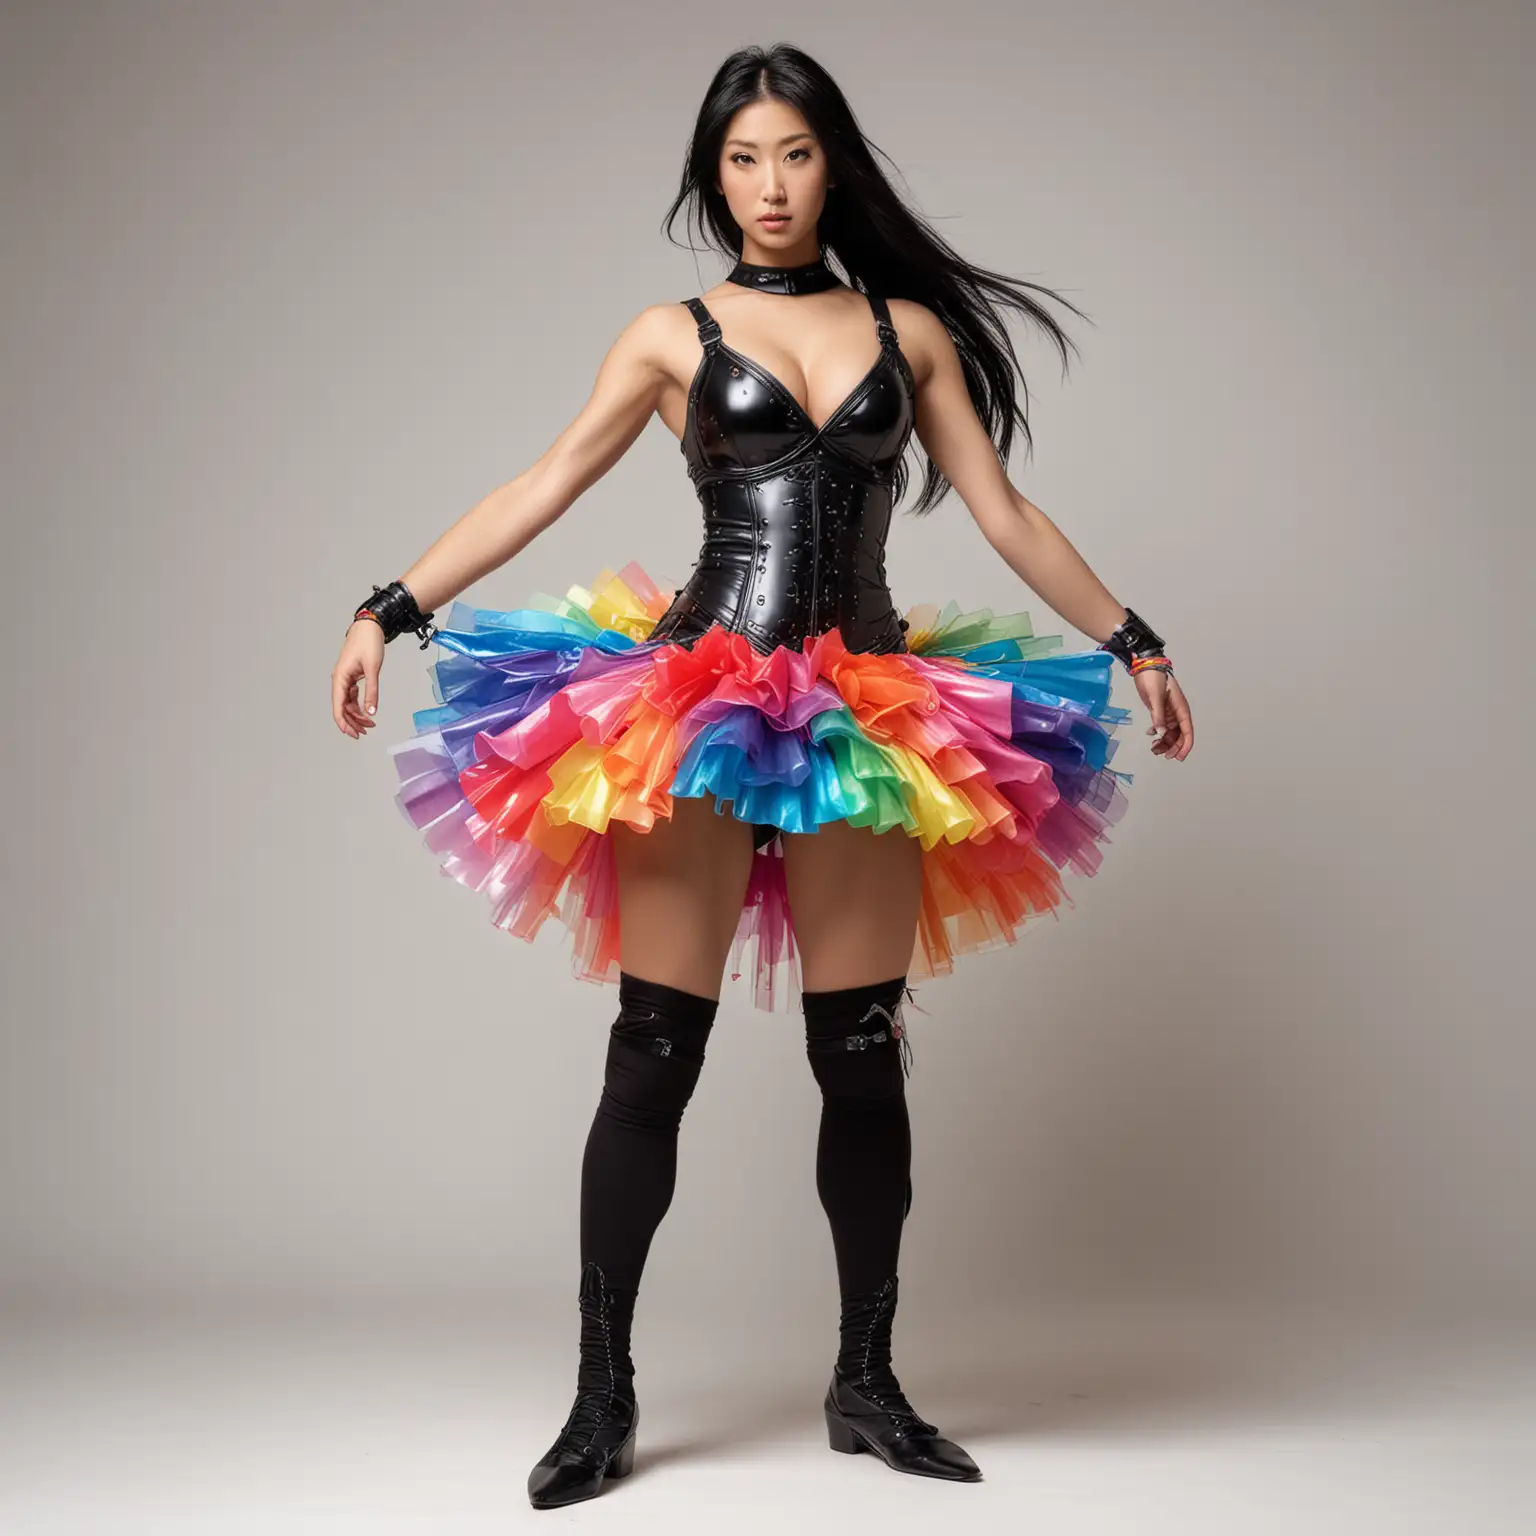 Standing front view, Beautiful toned athletic muscular figure female Japanese supermodel with large breasts, long black hair, in sleeveless black metal samurai-armor made of metal, bare shoulders, midriff exposed, shoulders exposed, sleeveless, giant puffy rainbow ballerina tutu, chromatic rainbow thigh-high socks, white background